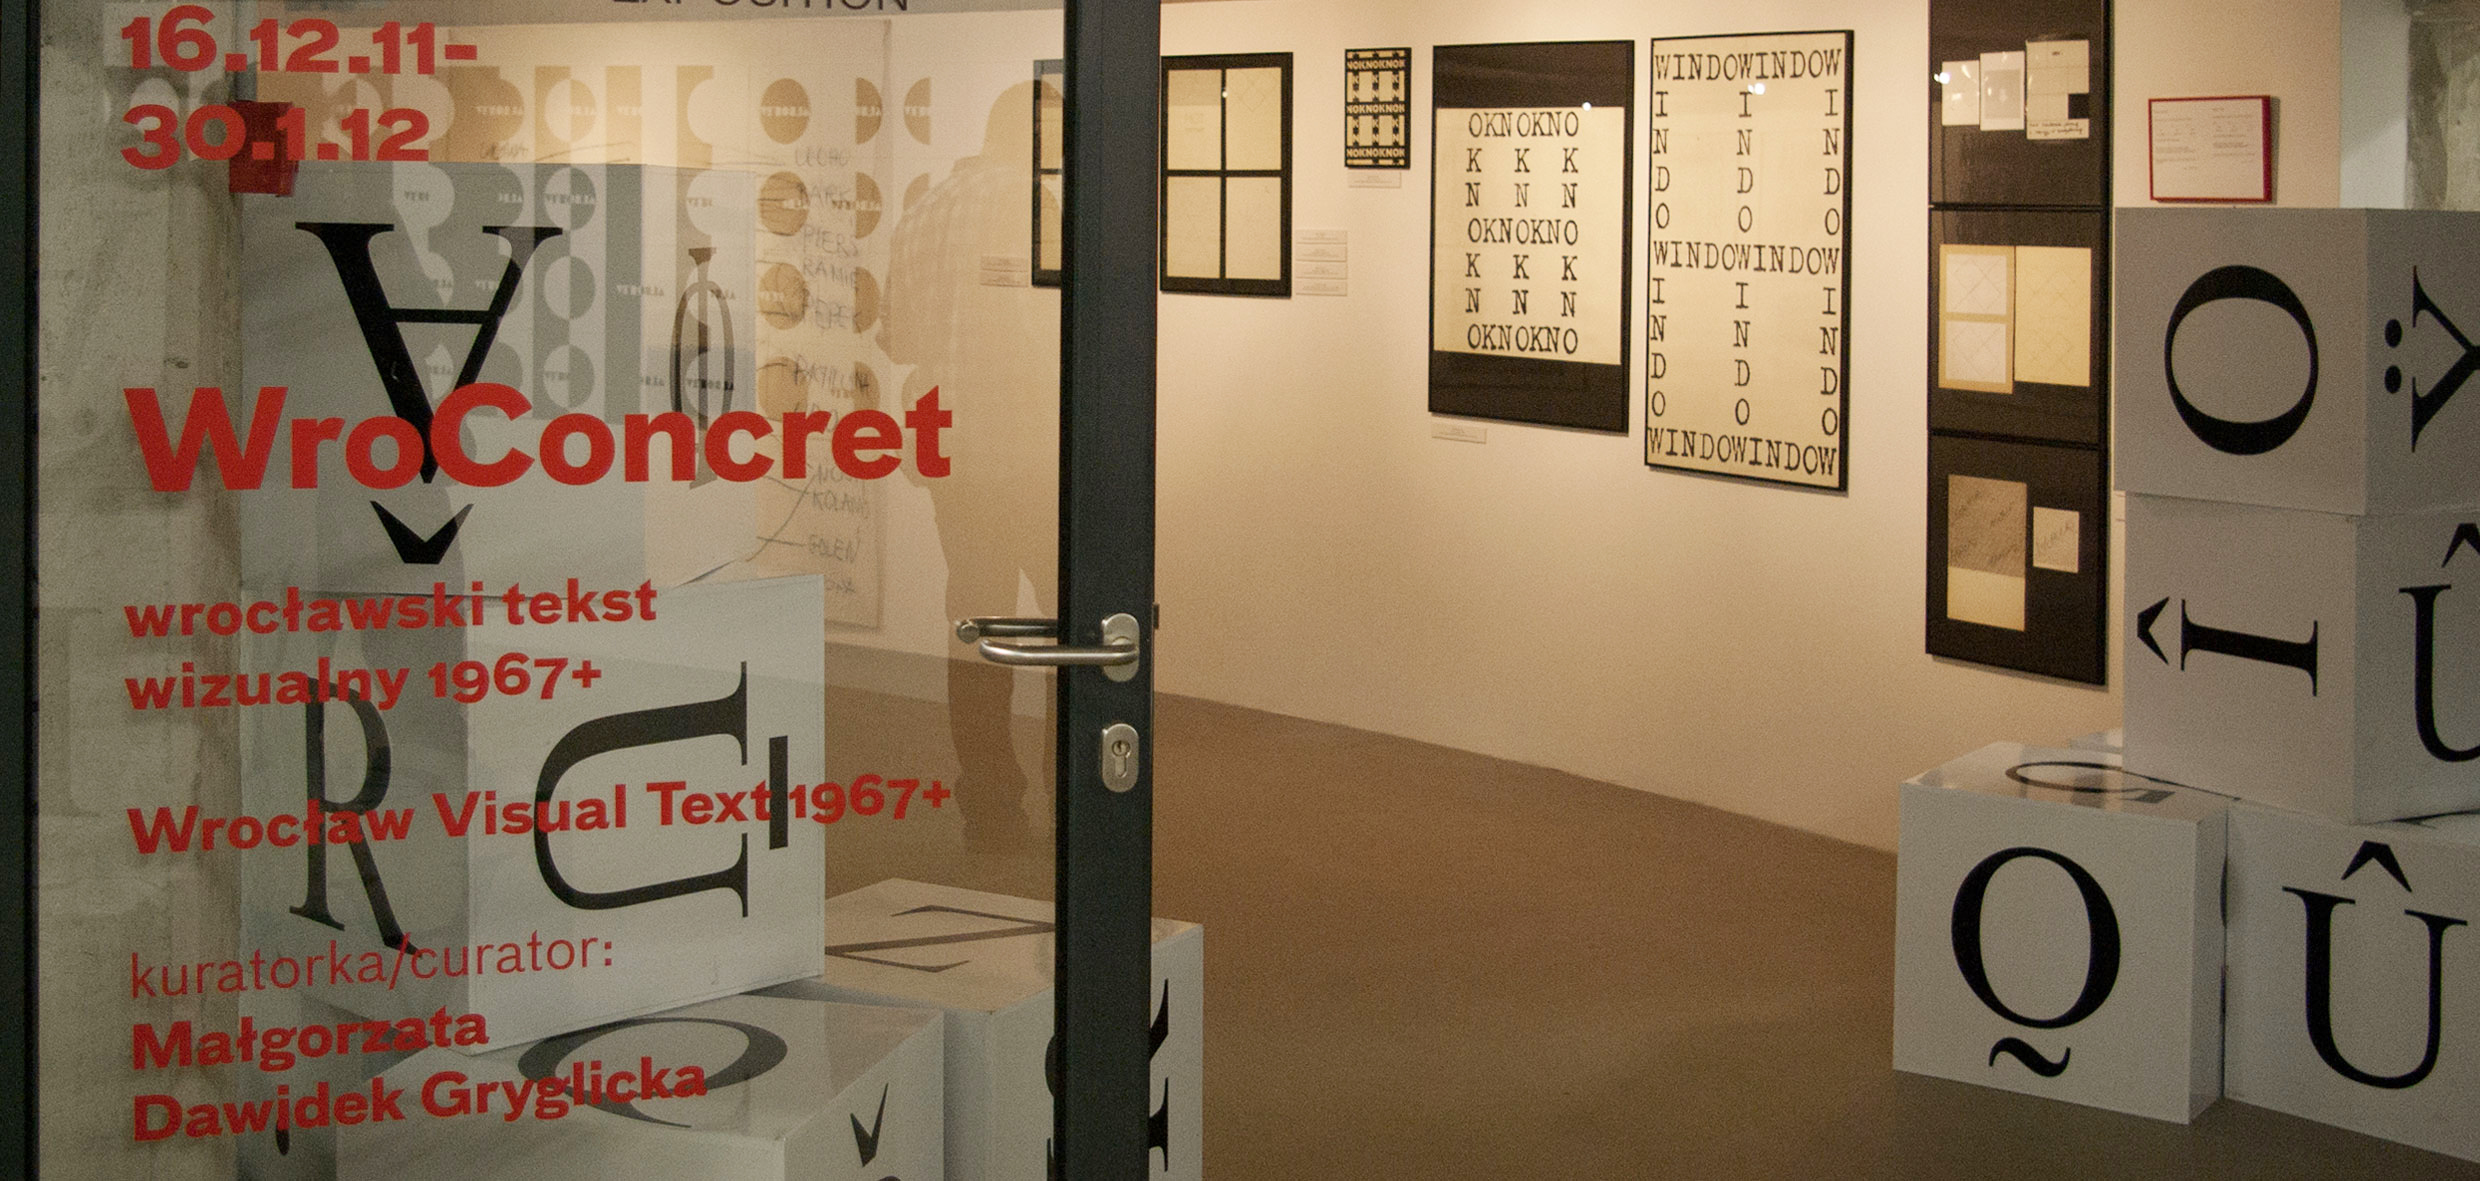 WroCONCRET – Opening and Exhibition